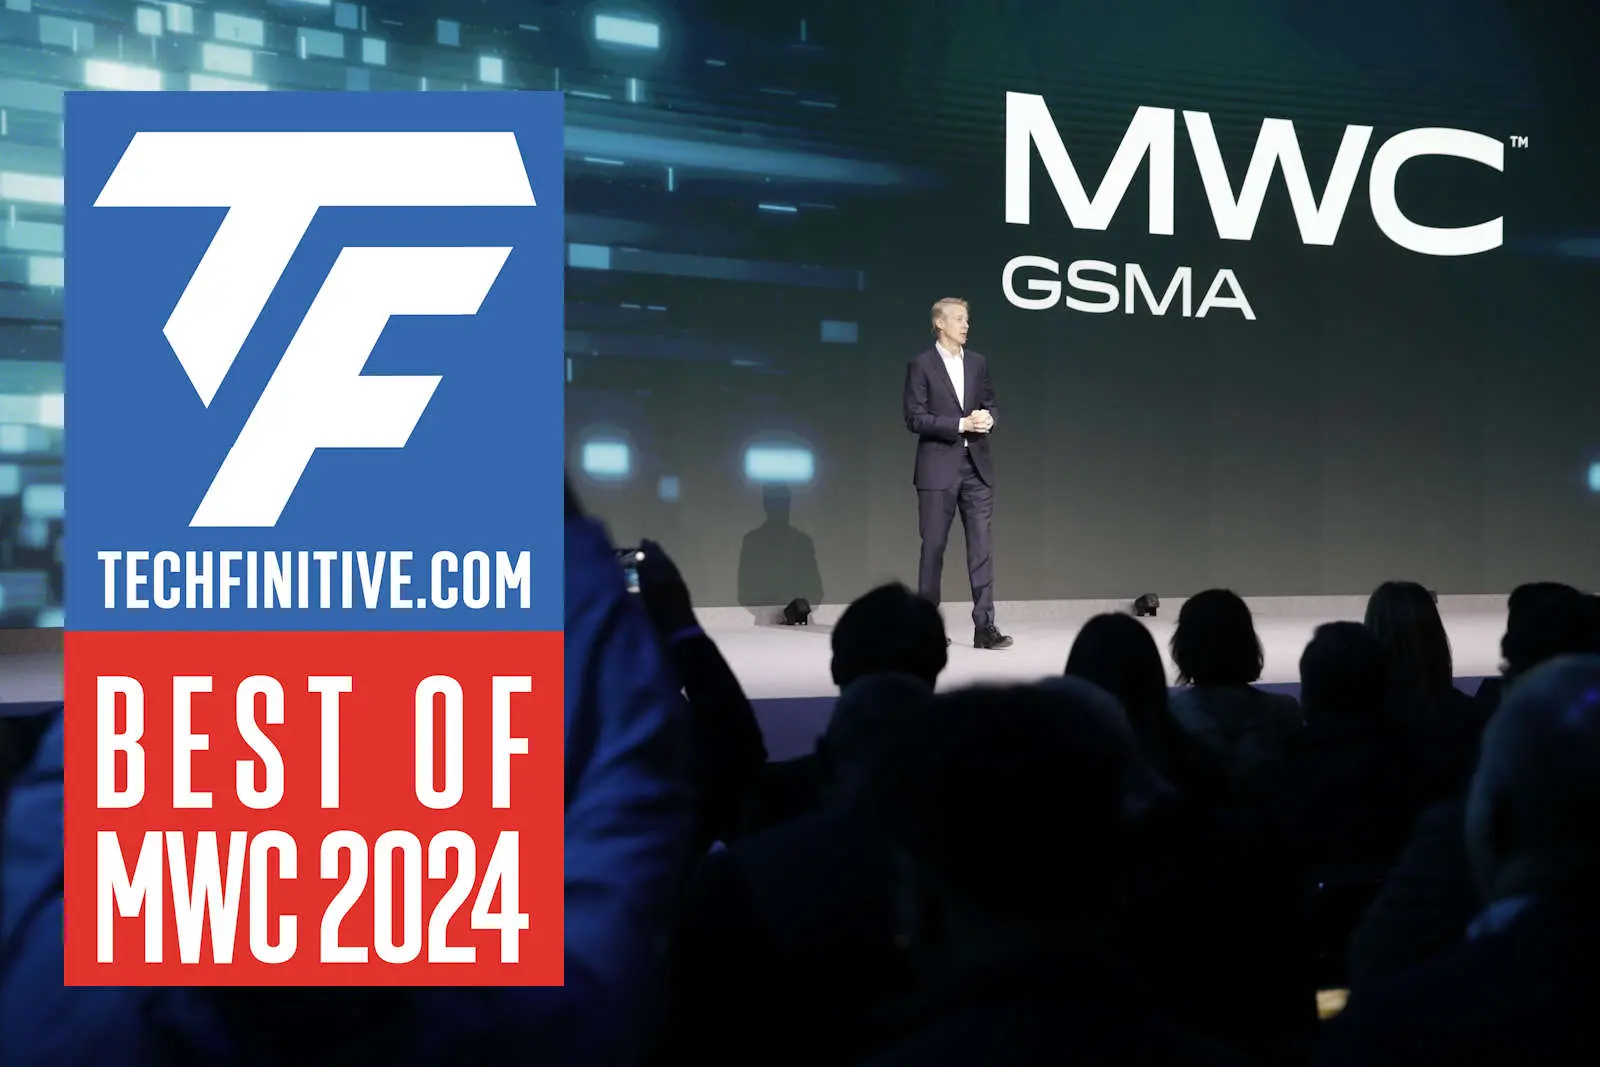 Best of MWC 2024 image from show overlaid with logo